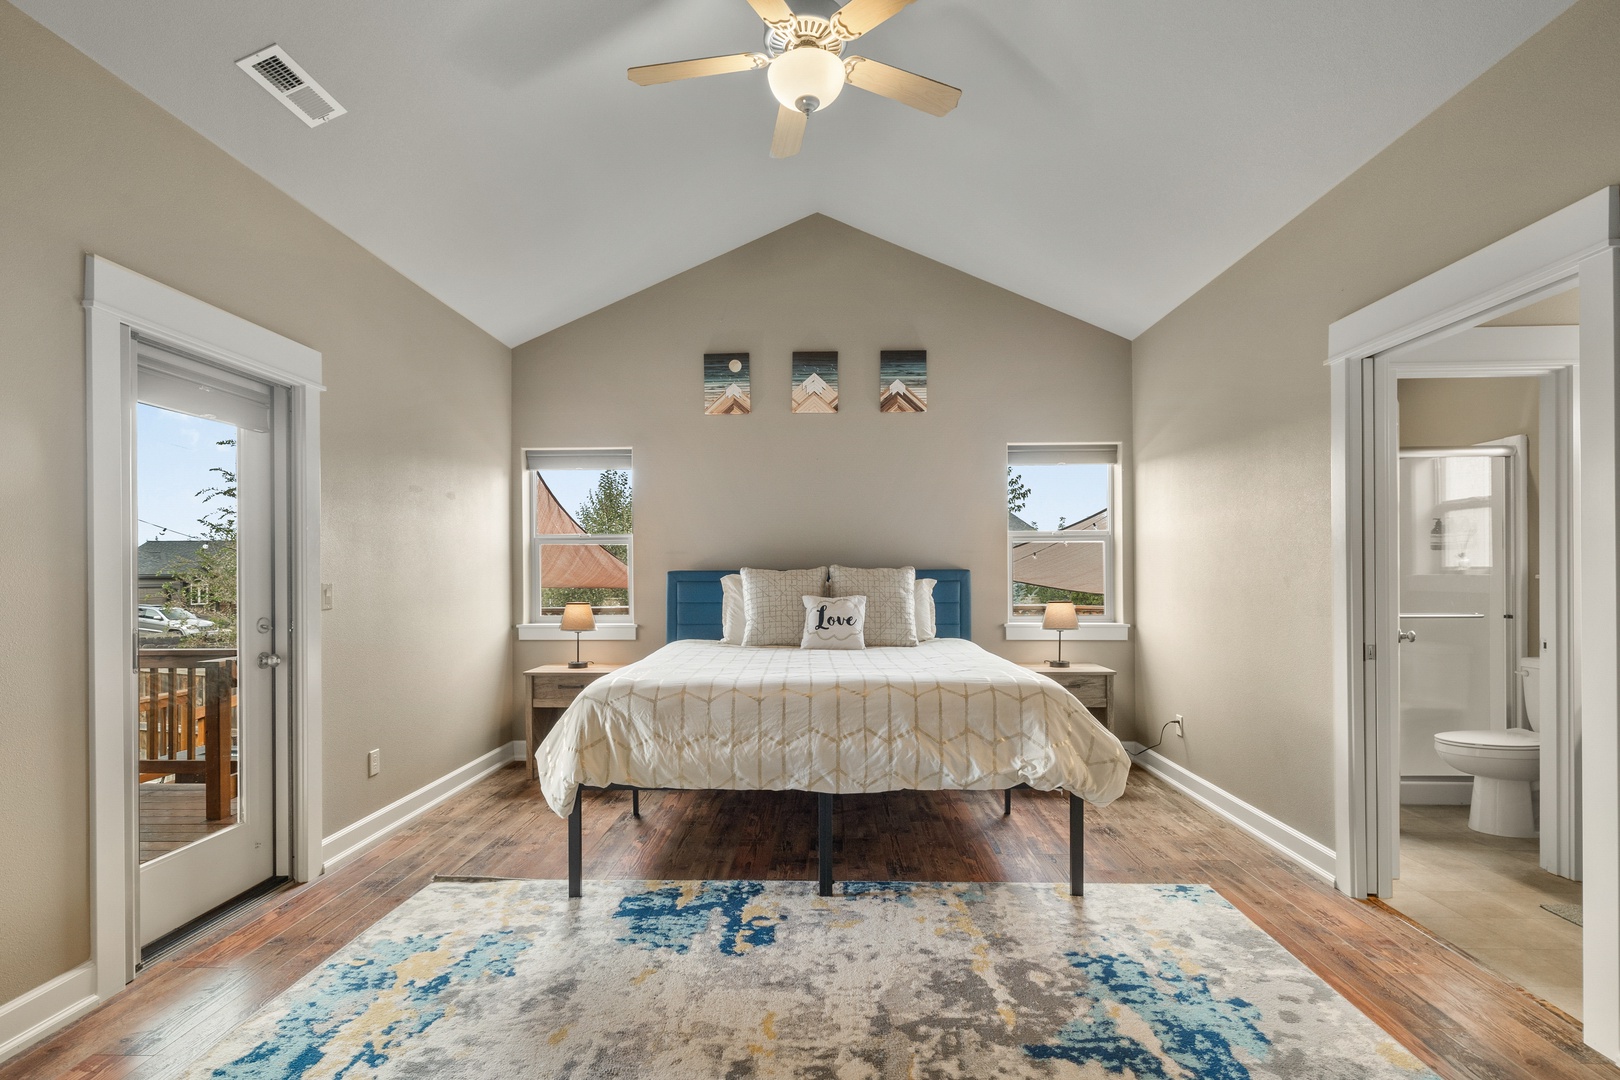 The master suite offers a king bed, private en suite, Smart TV, & patio access